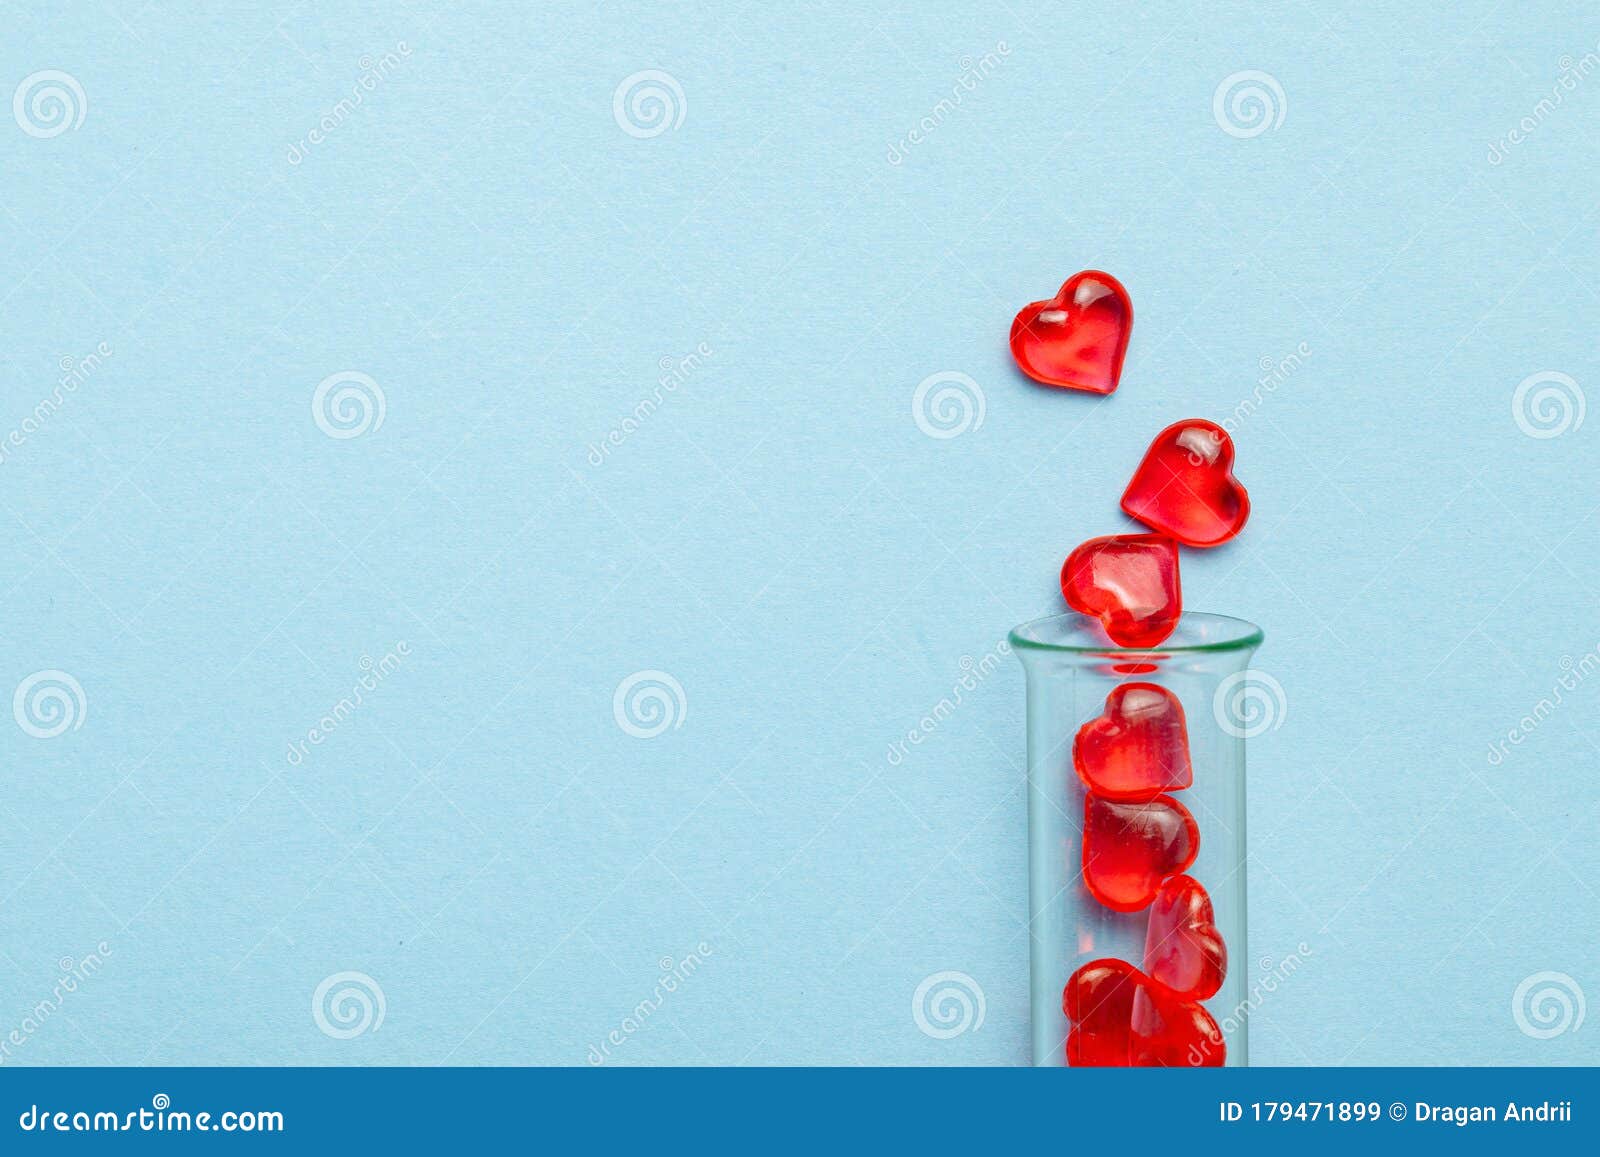 hearts and test tube. baby from tube vitro glass. artificial insemination, ivf. blue background. copy space for text.